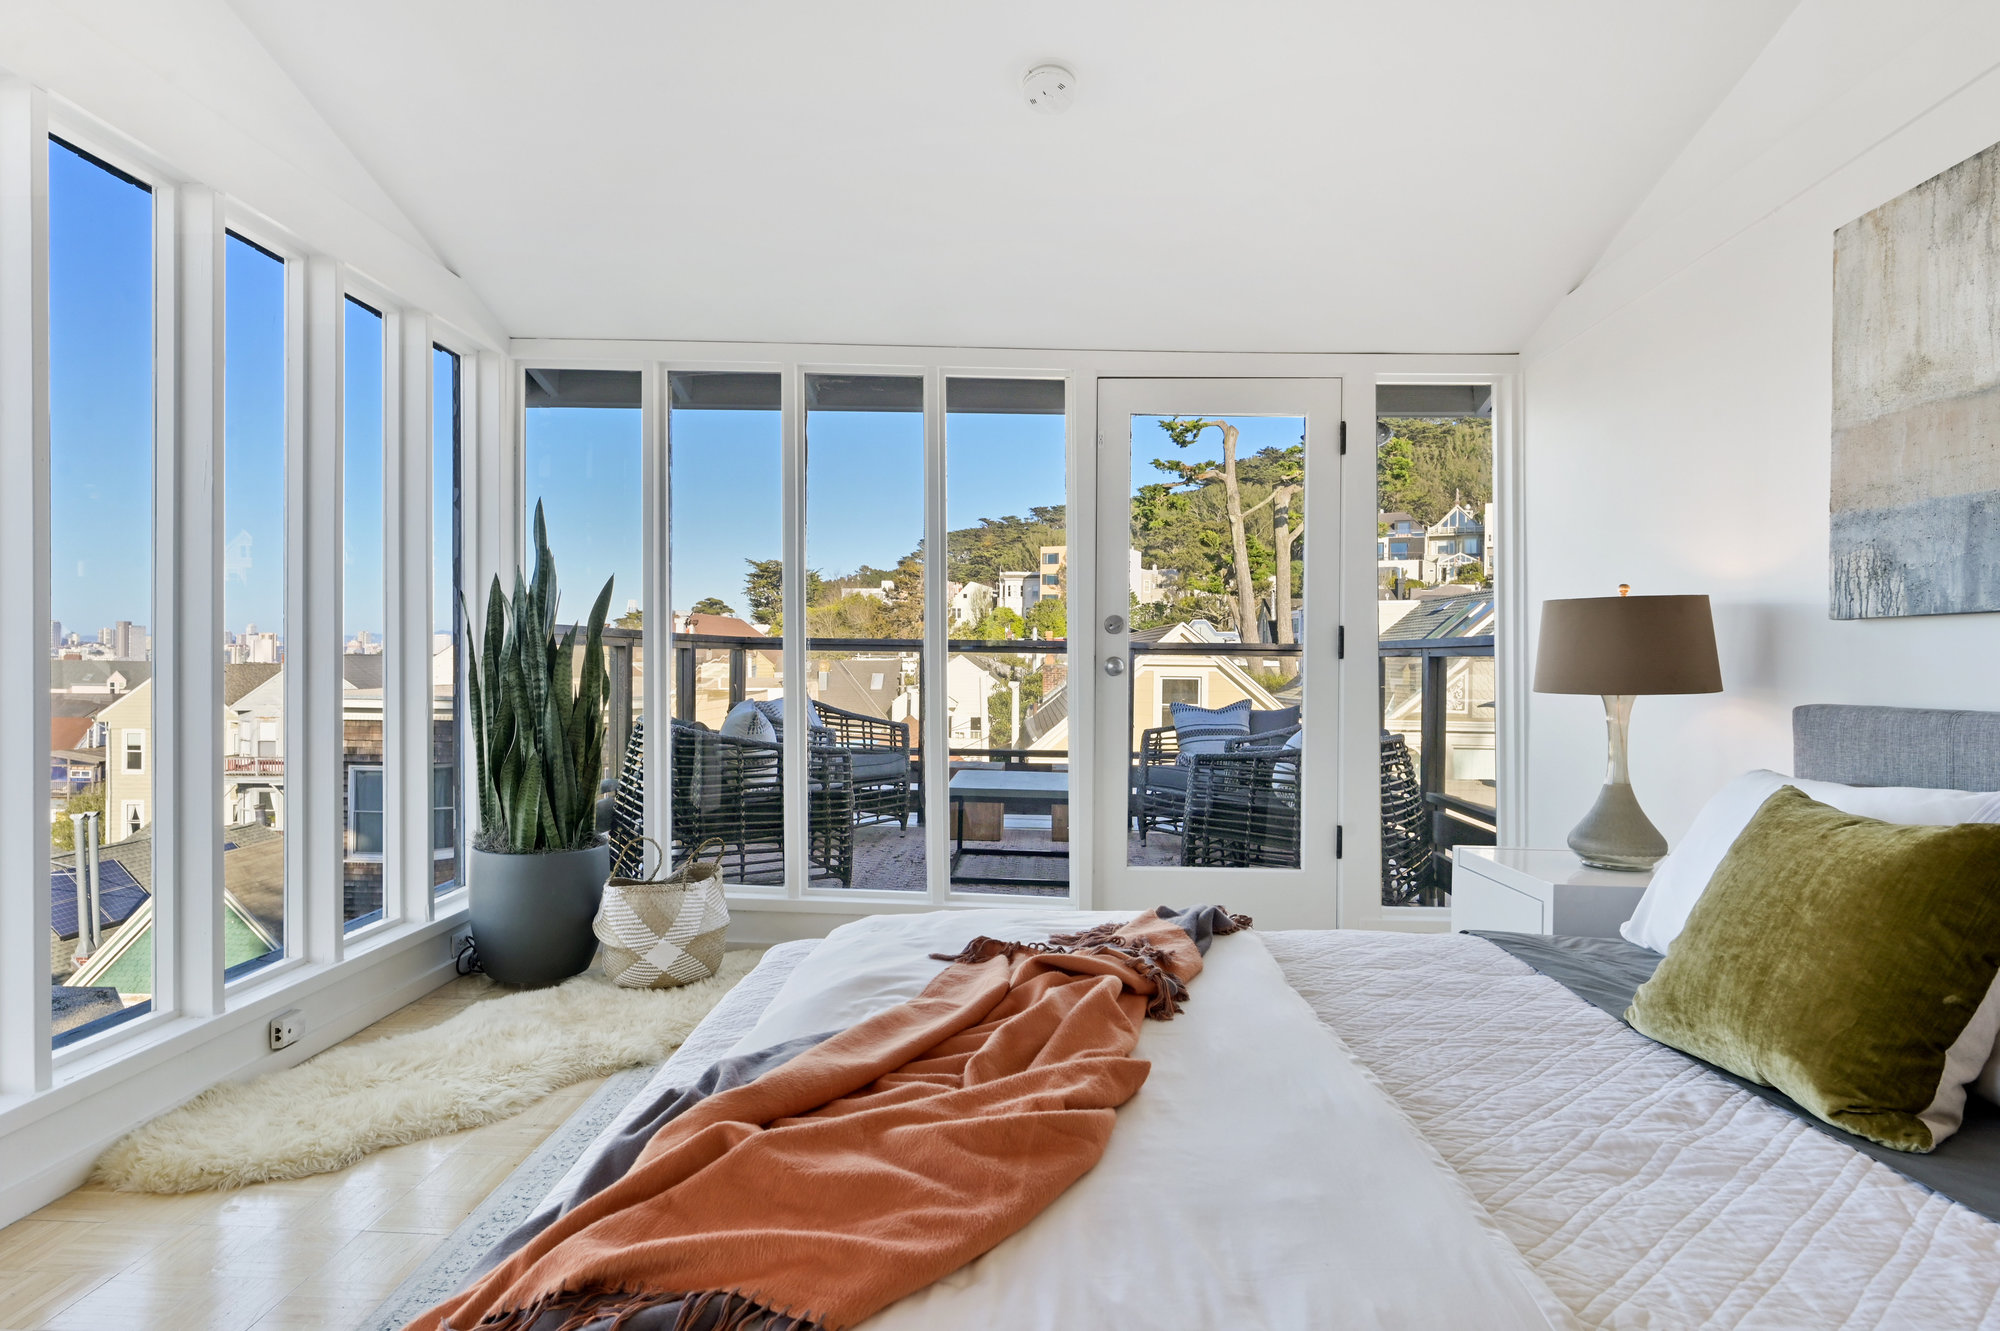 View from the top-floor bedroom at 39 Delmar, featuring a room with wrap-around windows and views of the city